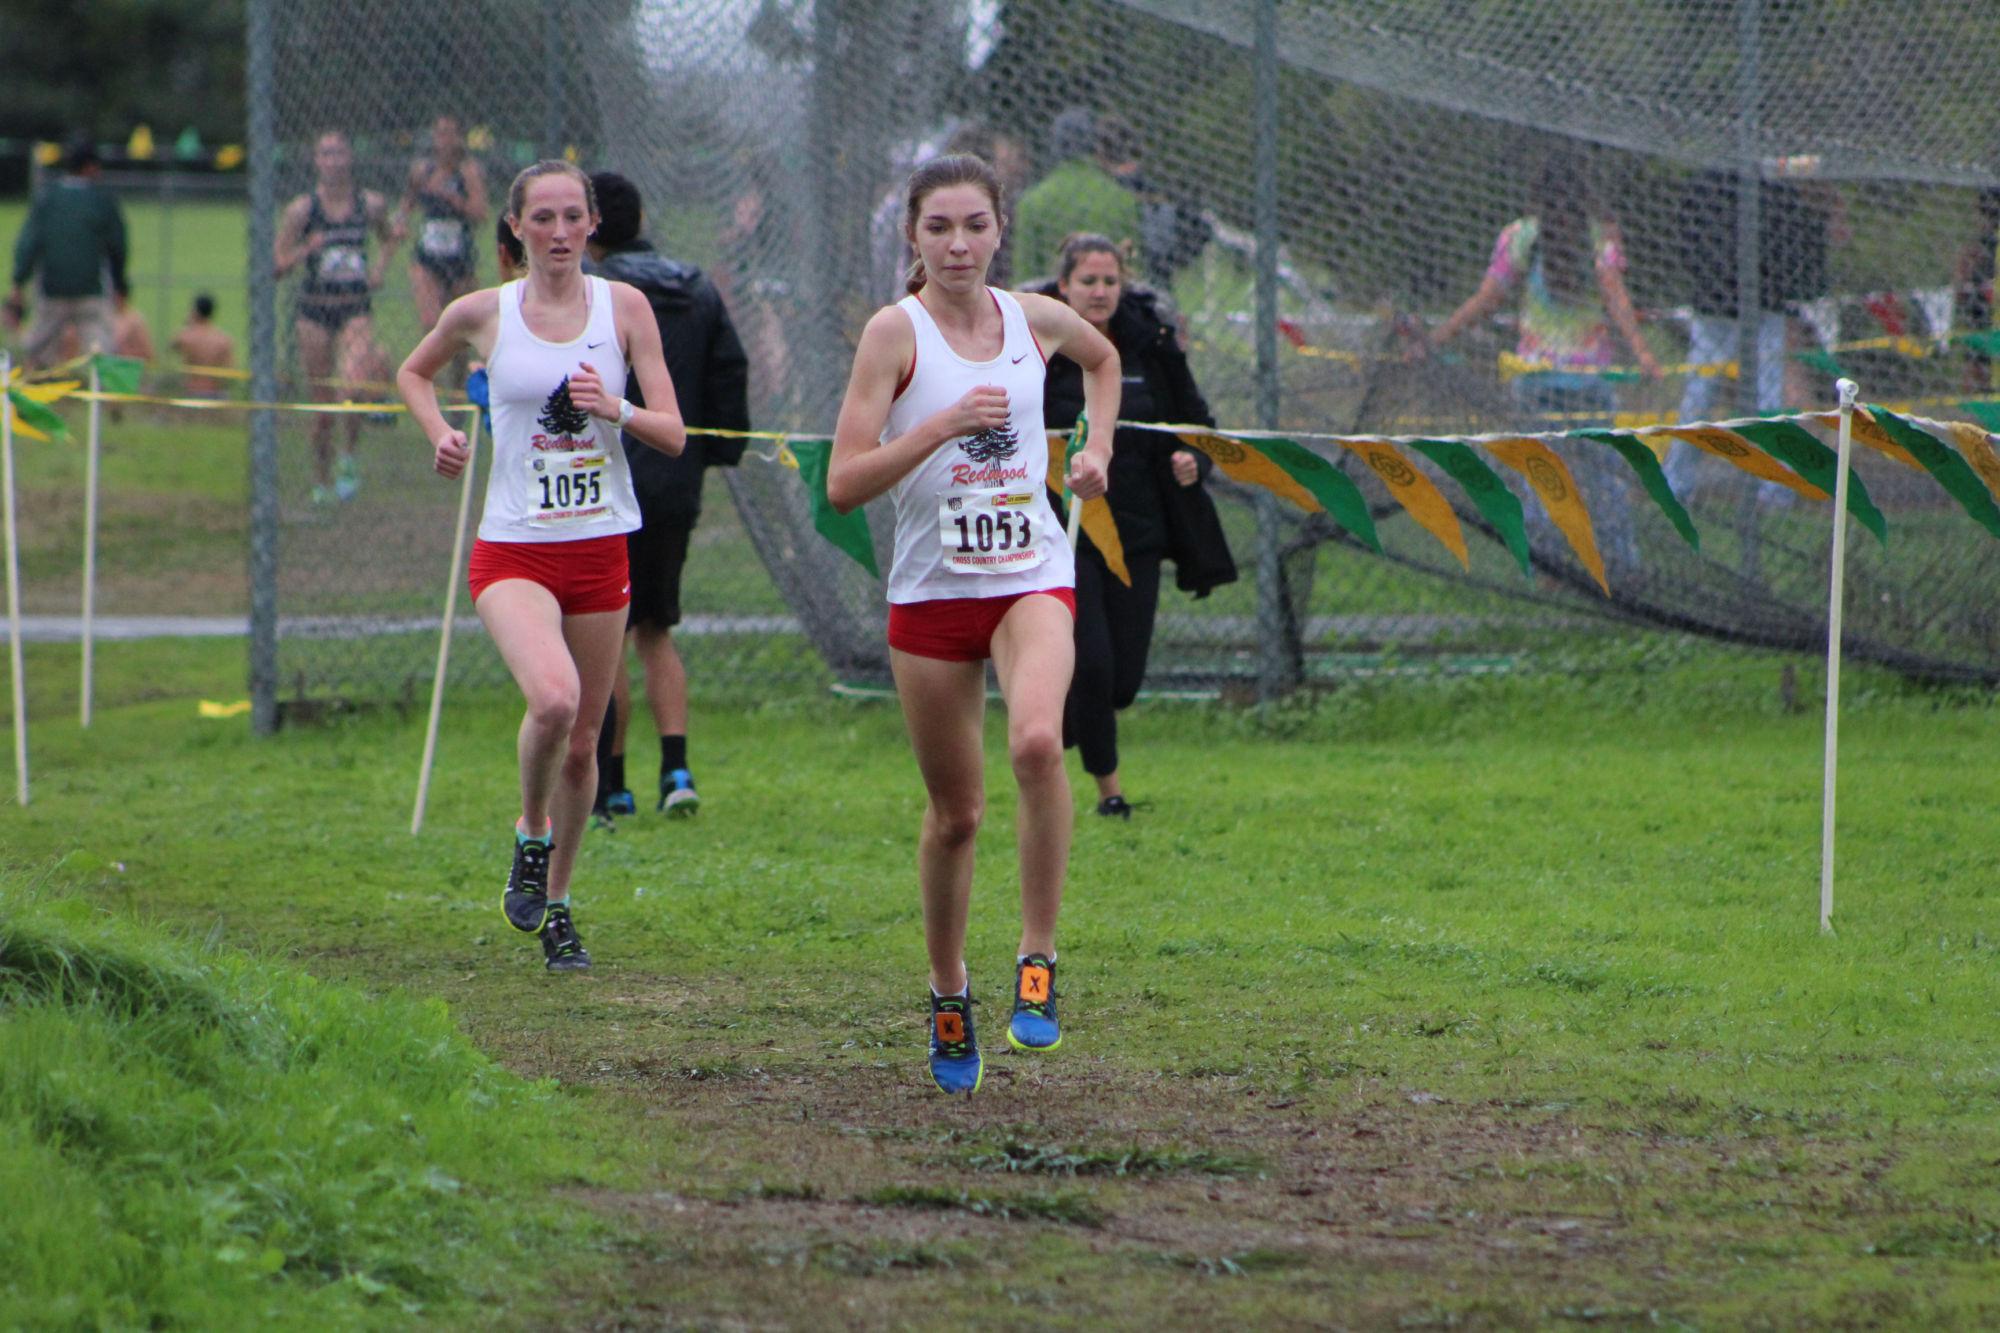 Senior Glennis Murphy and Junior Gillian Wagner break away from the pack of runners on their way to their first and second place finishes, respectively, at the NCS meet